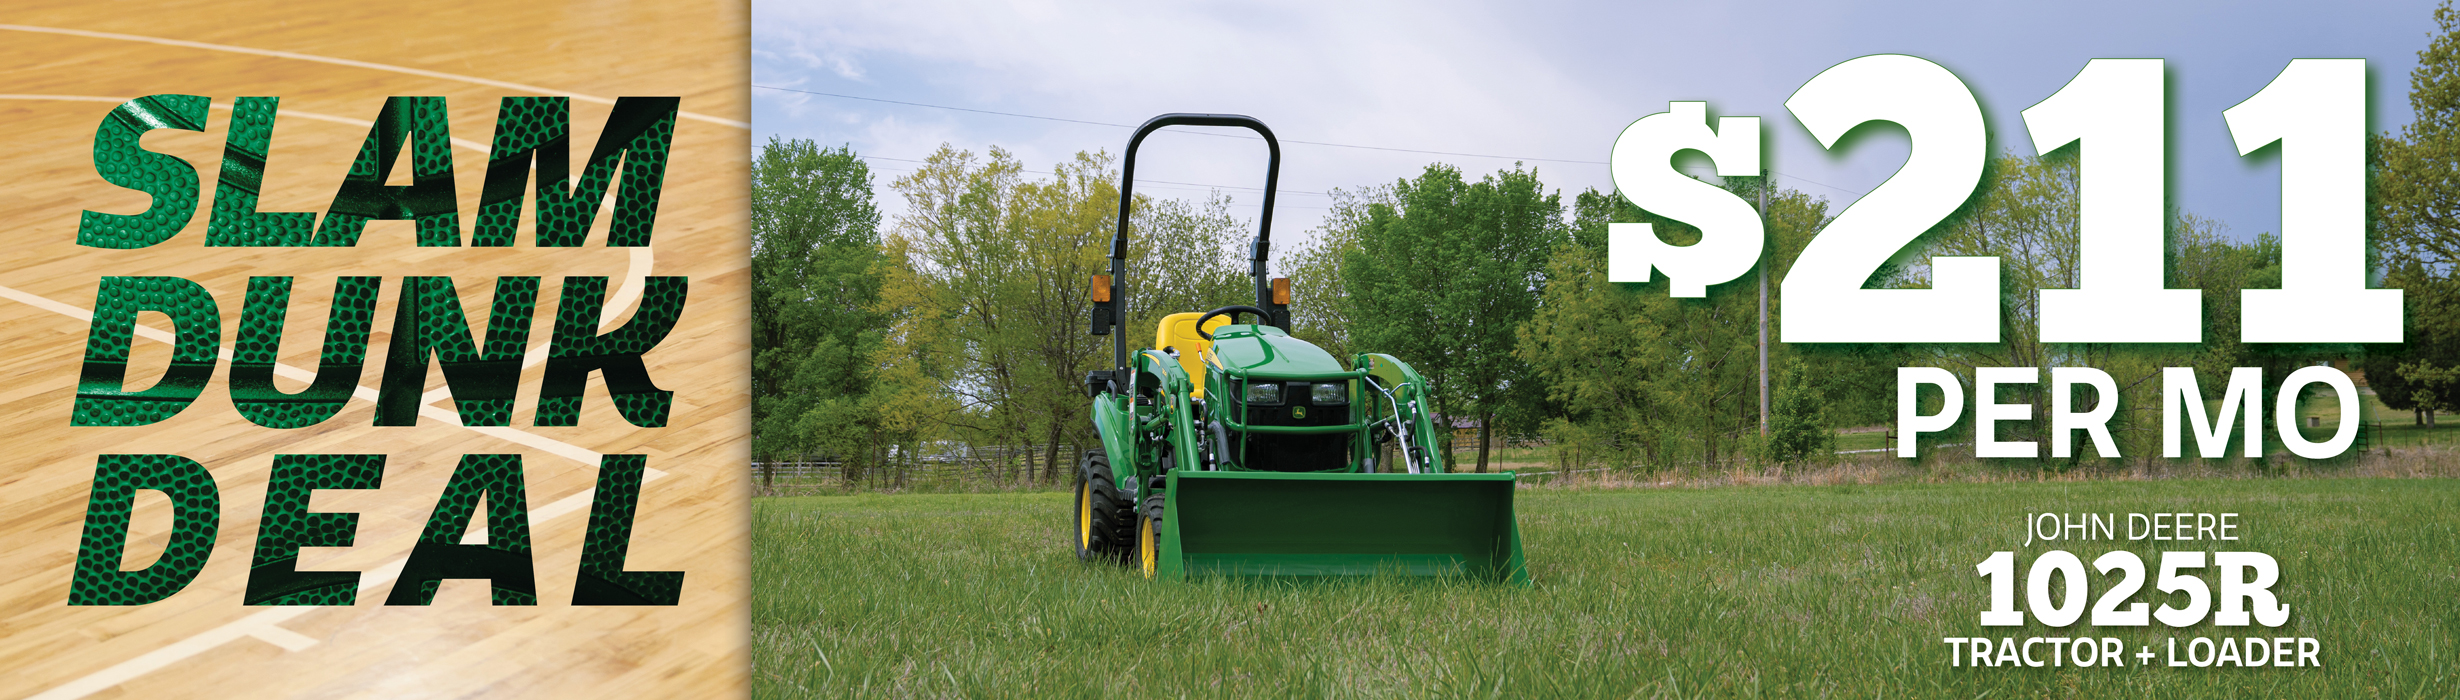 Get the 1025R Tractor + Loader for just $211/mo!